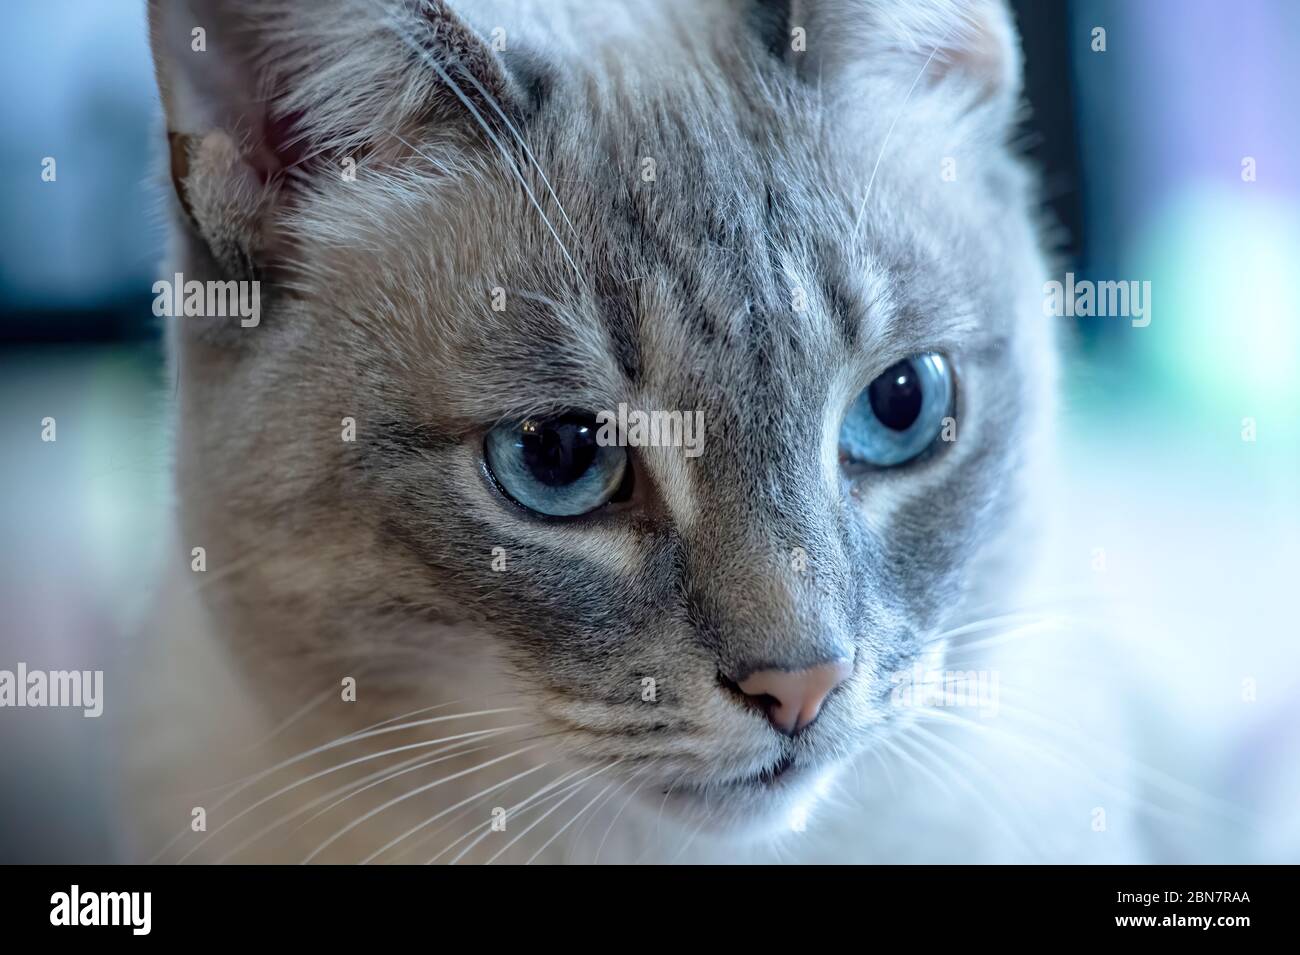 Close up to Siamese cat with blue eyes. Domestic cat with turquoise blue eyes. Stock Photo